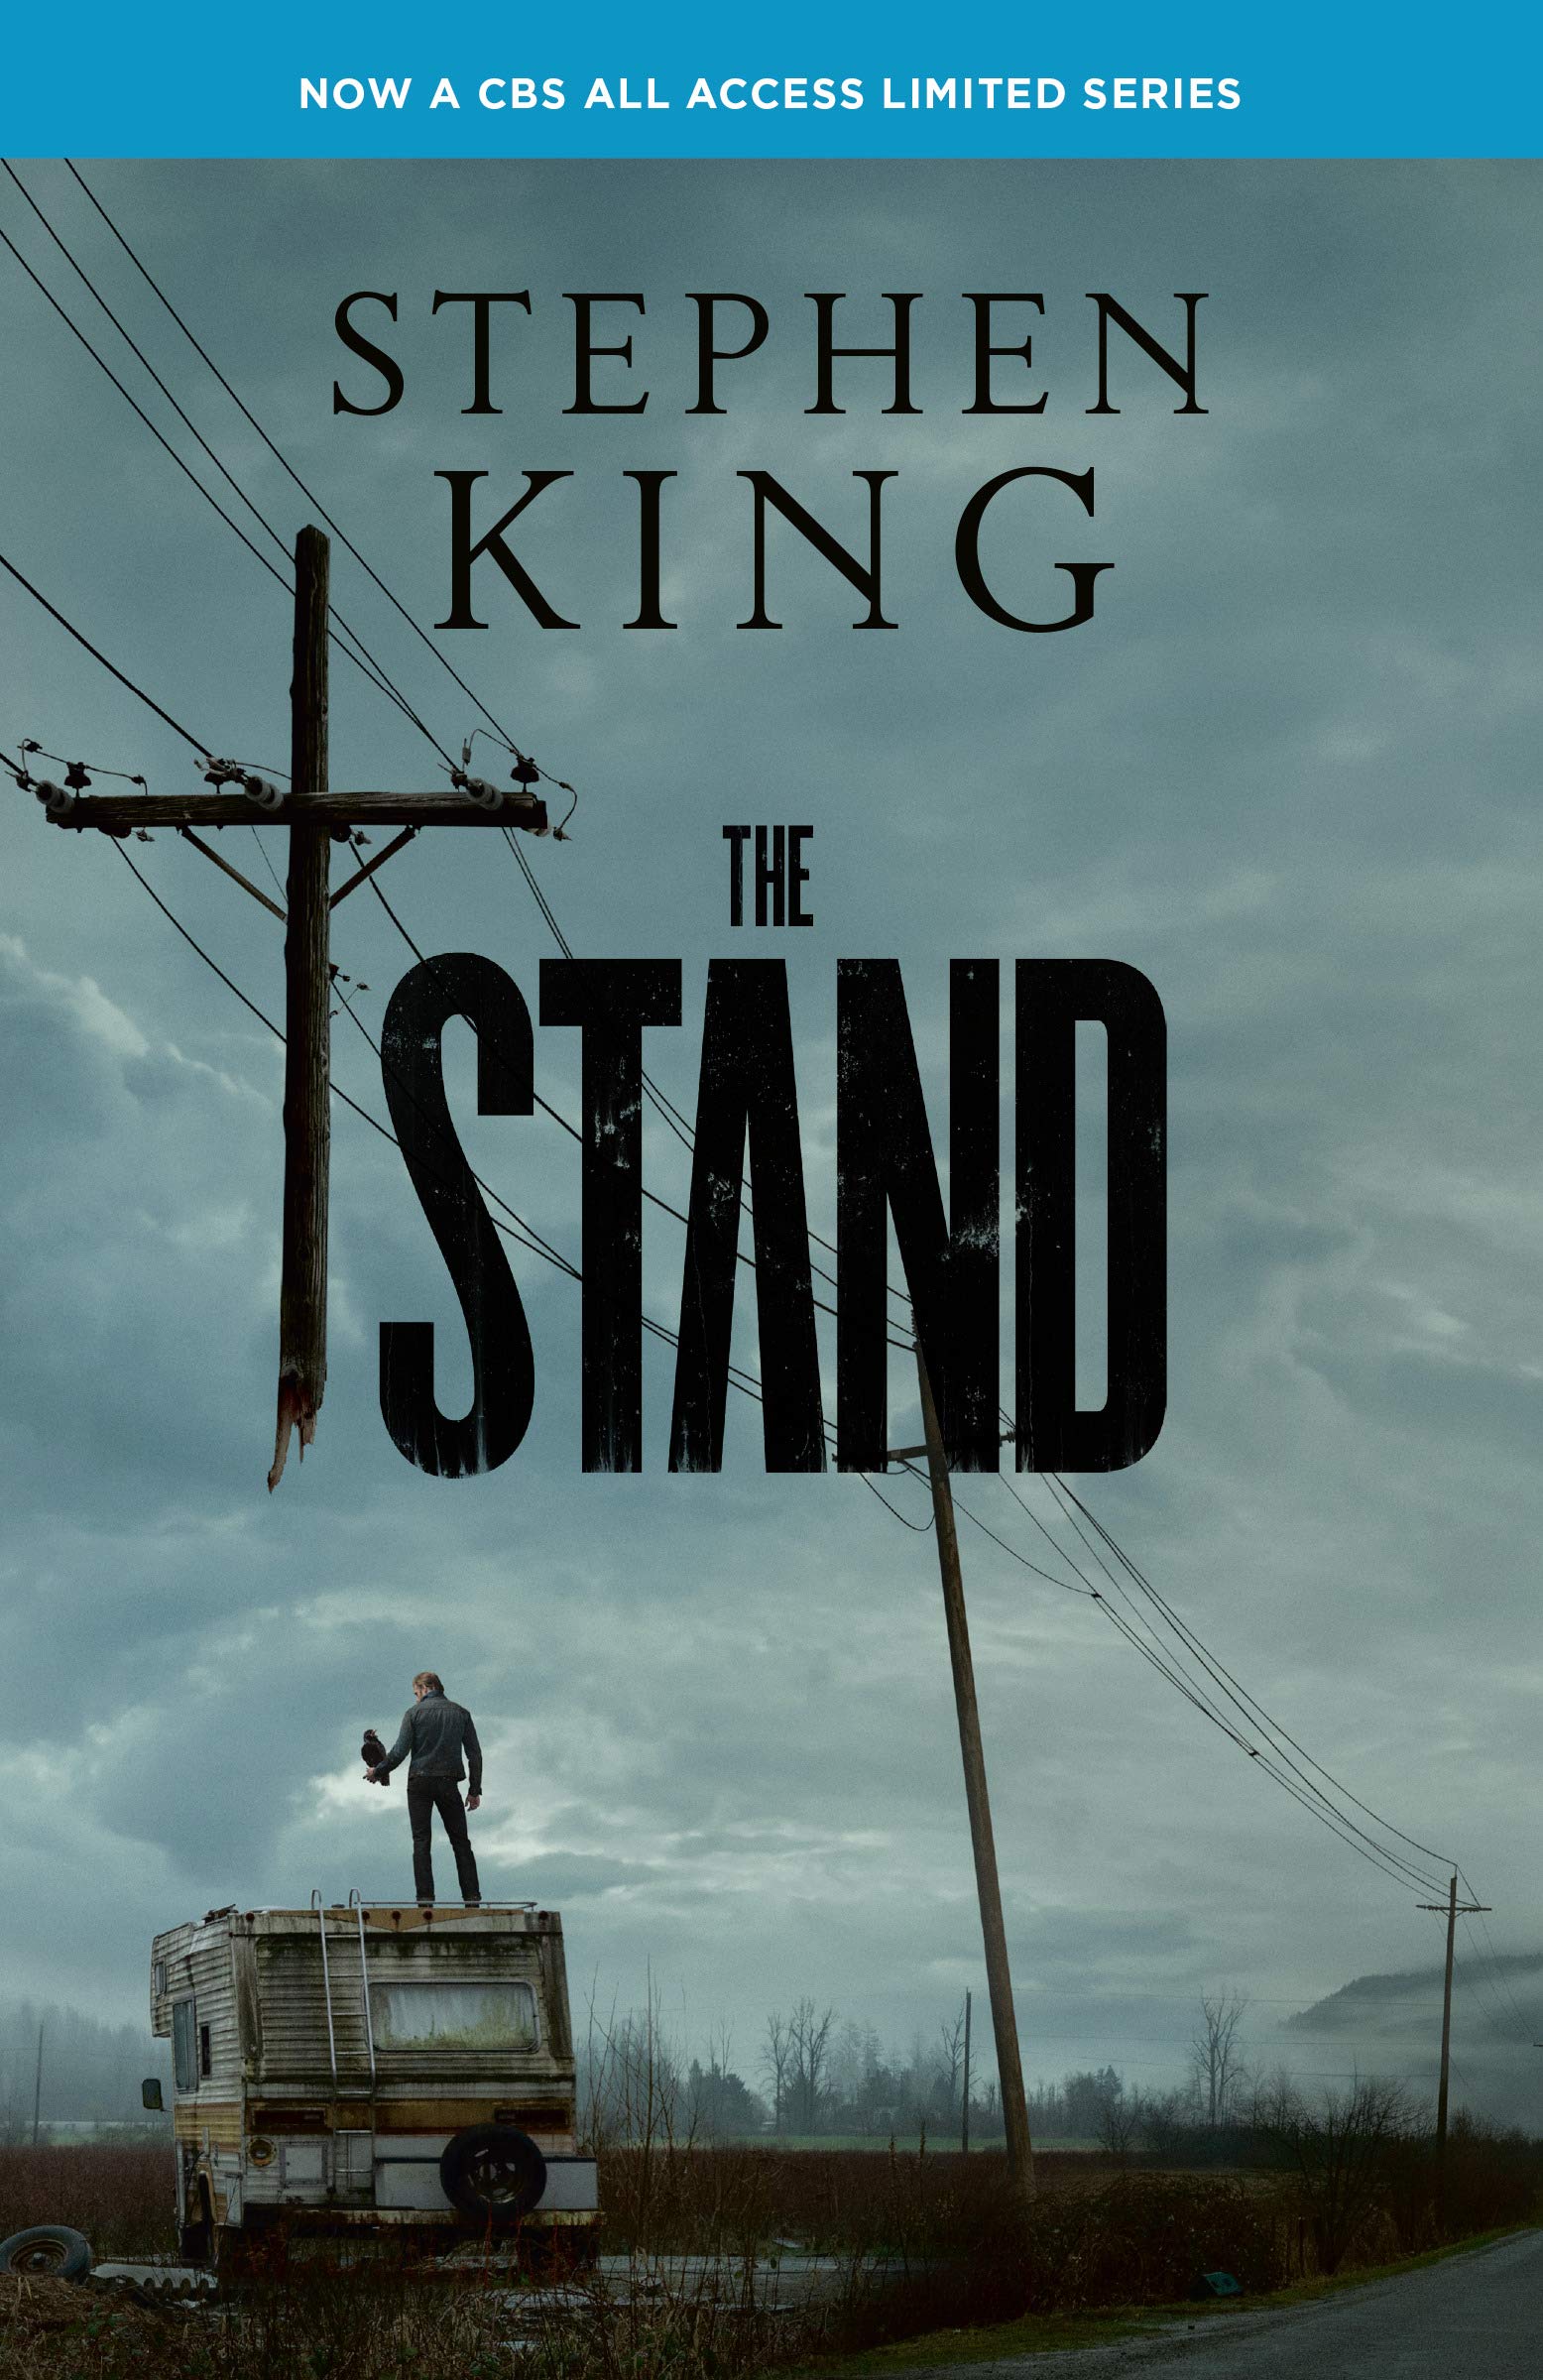 The Stand (eBook) by Stephen King $1.99